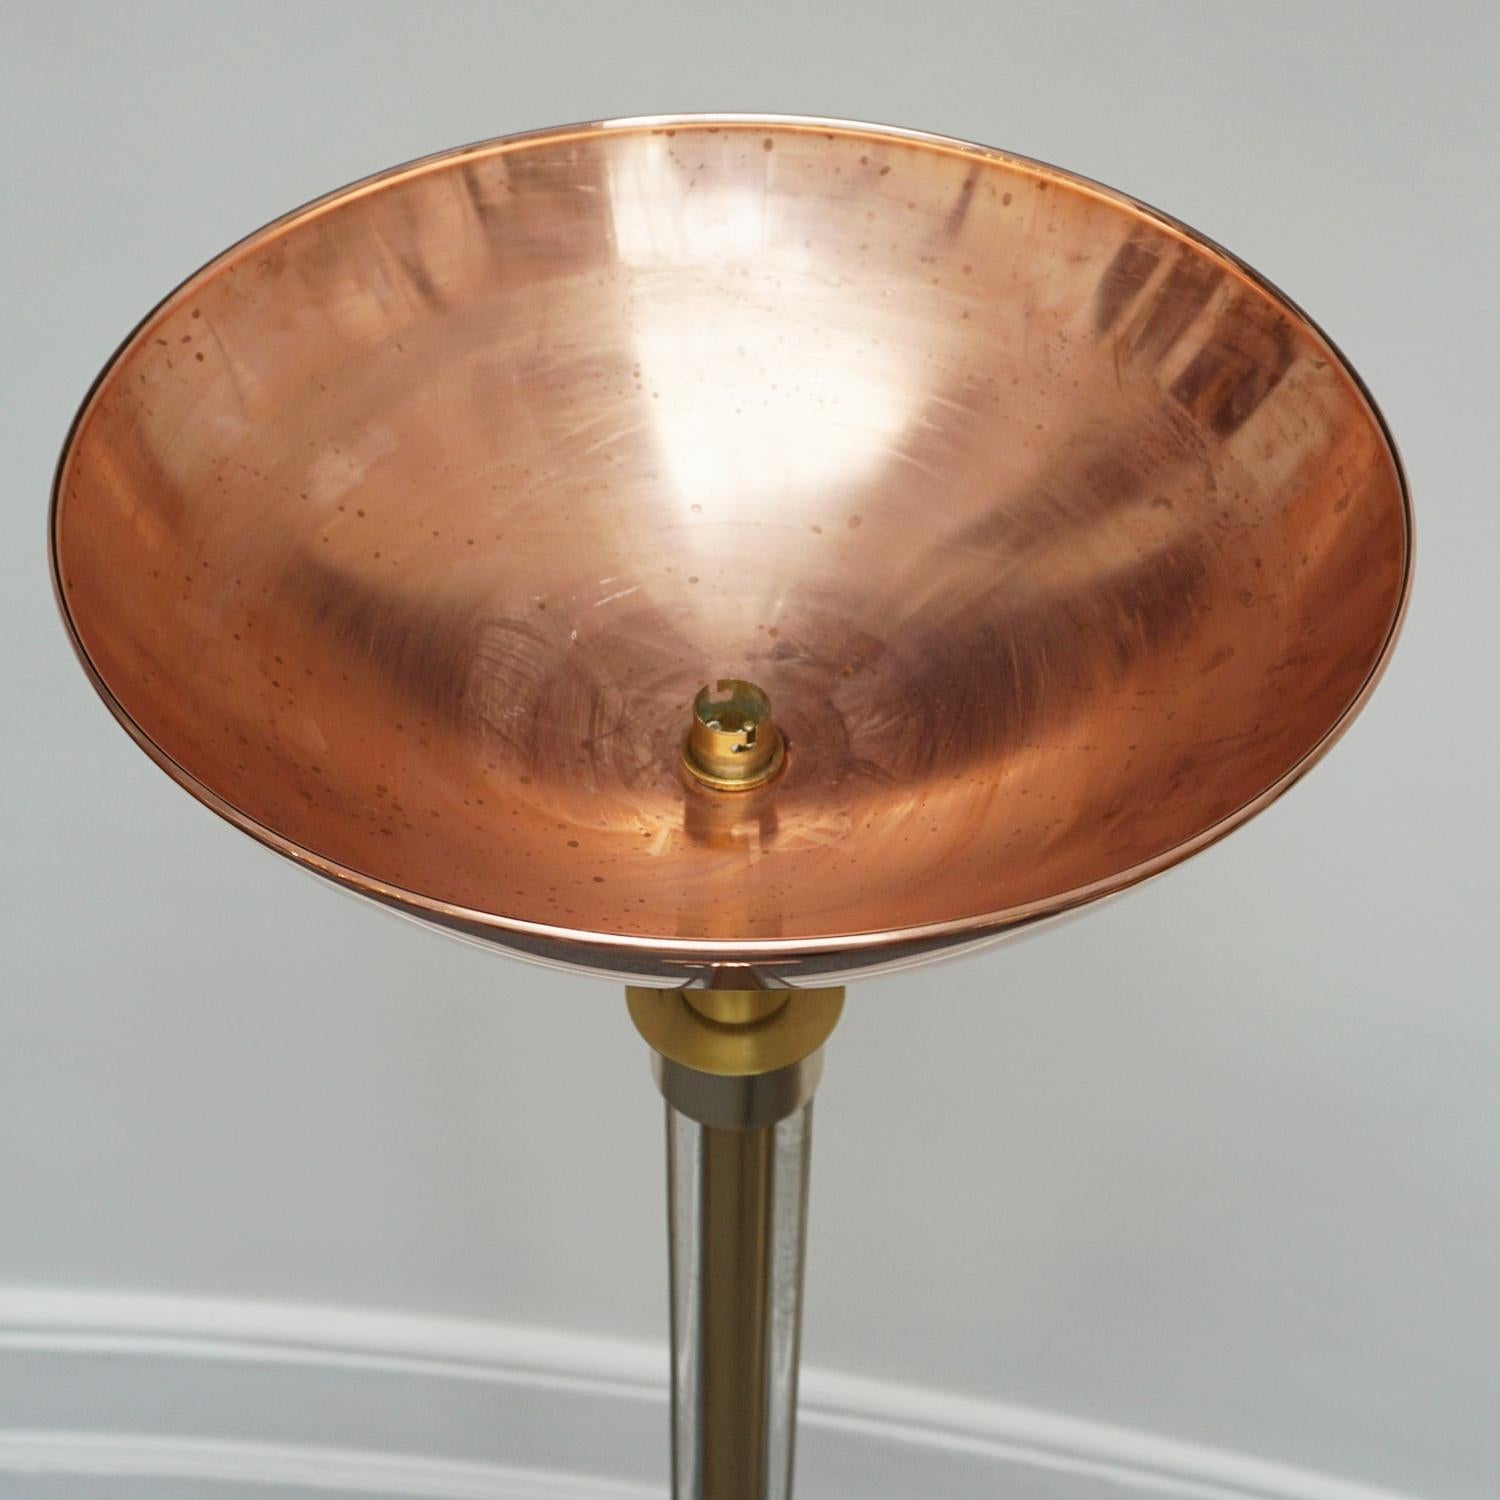 Art Deco Brass Copper and Glass Uplighter Floor Lamp For Sale 1